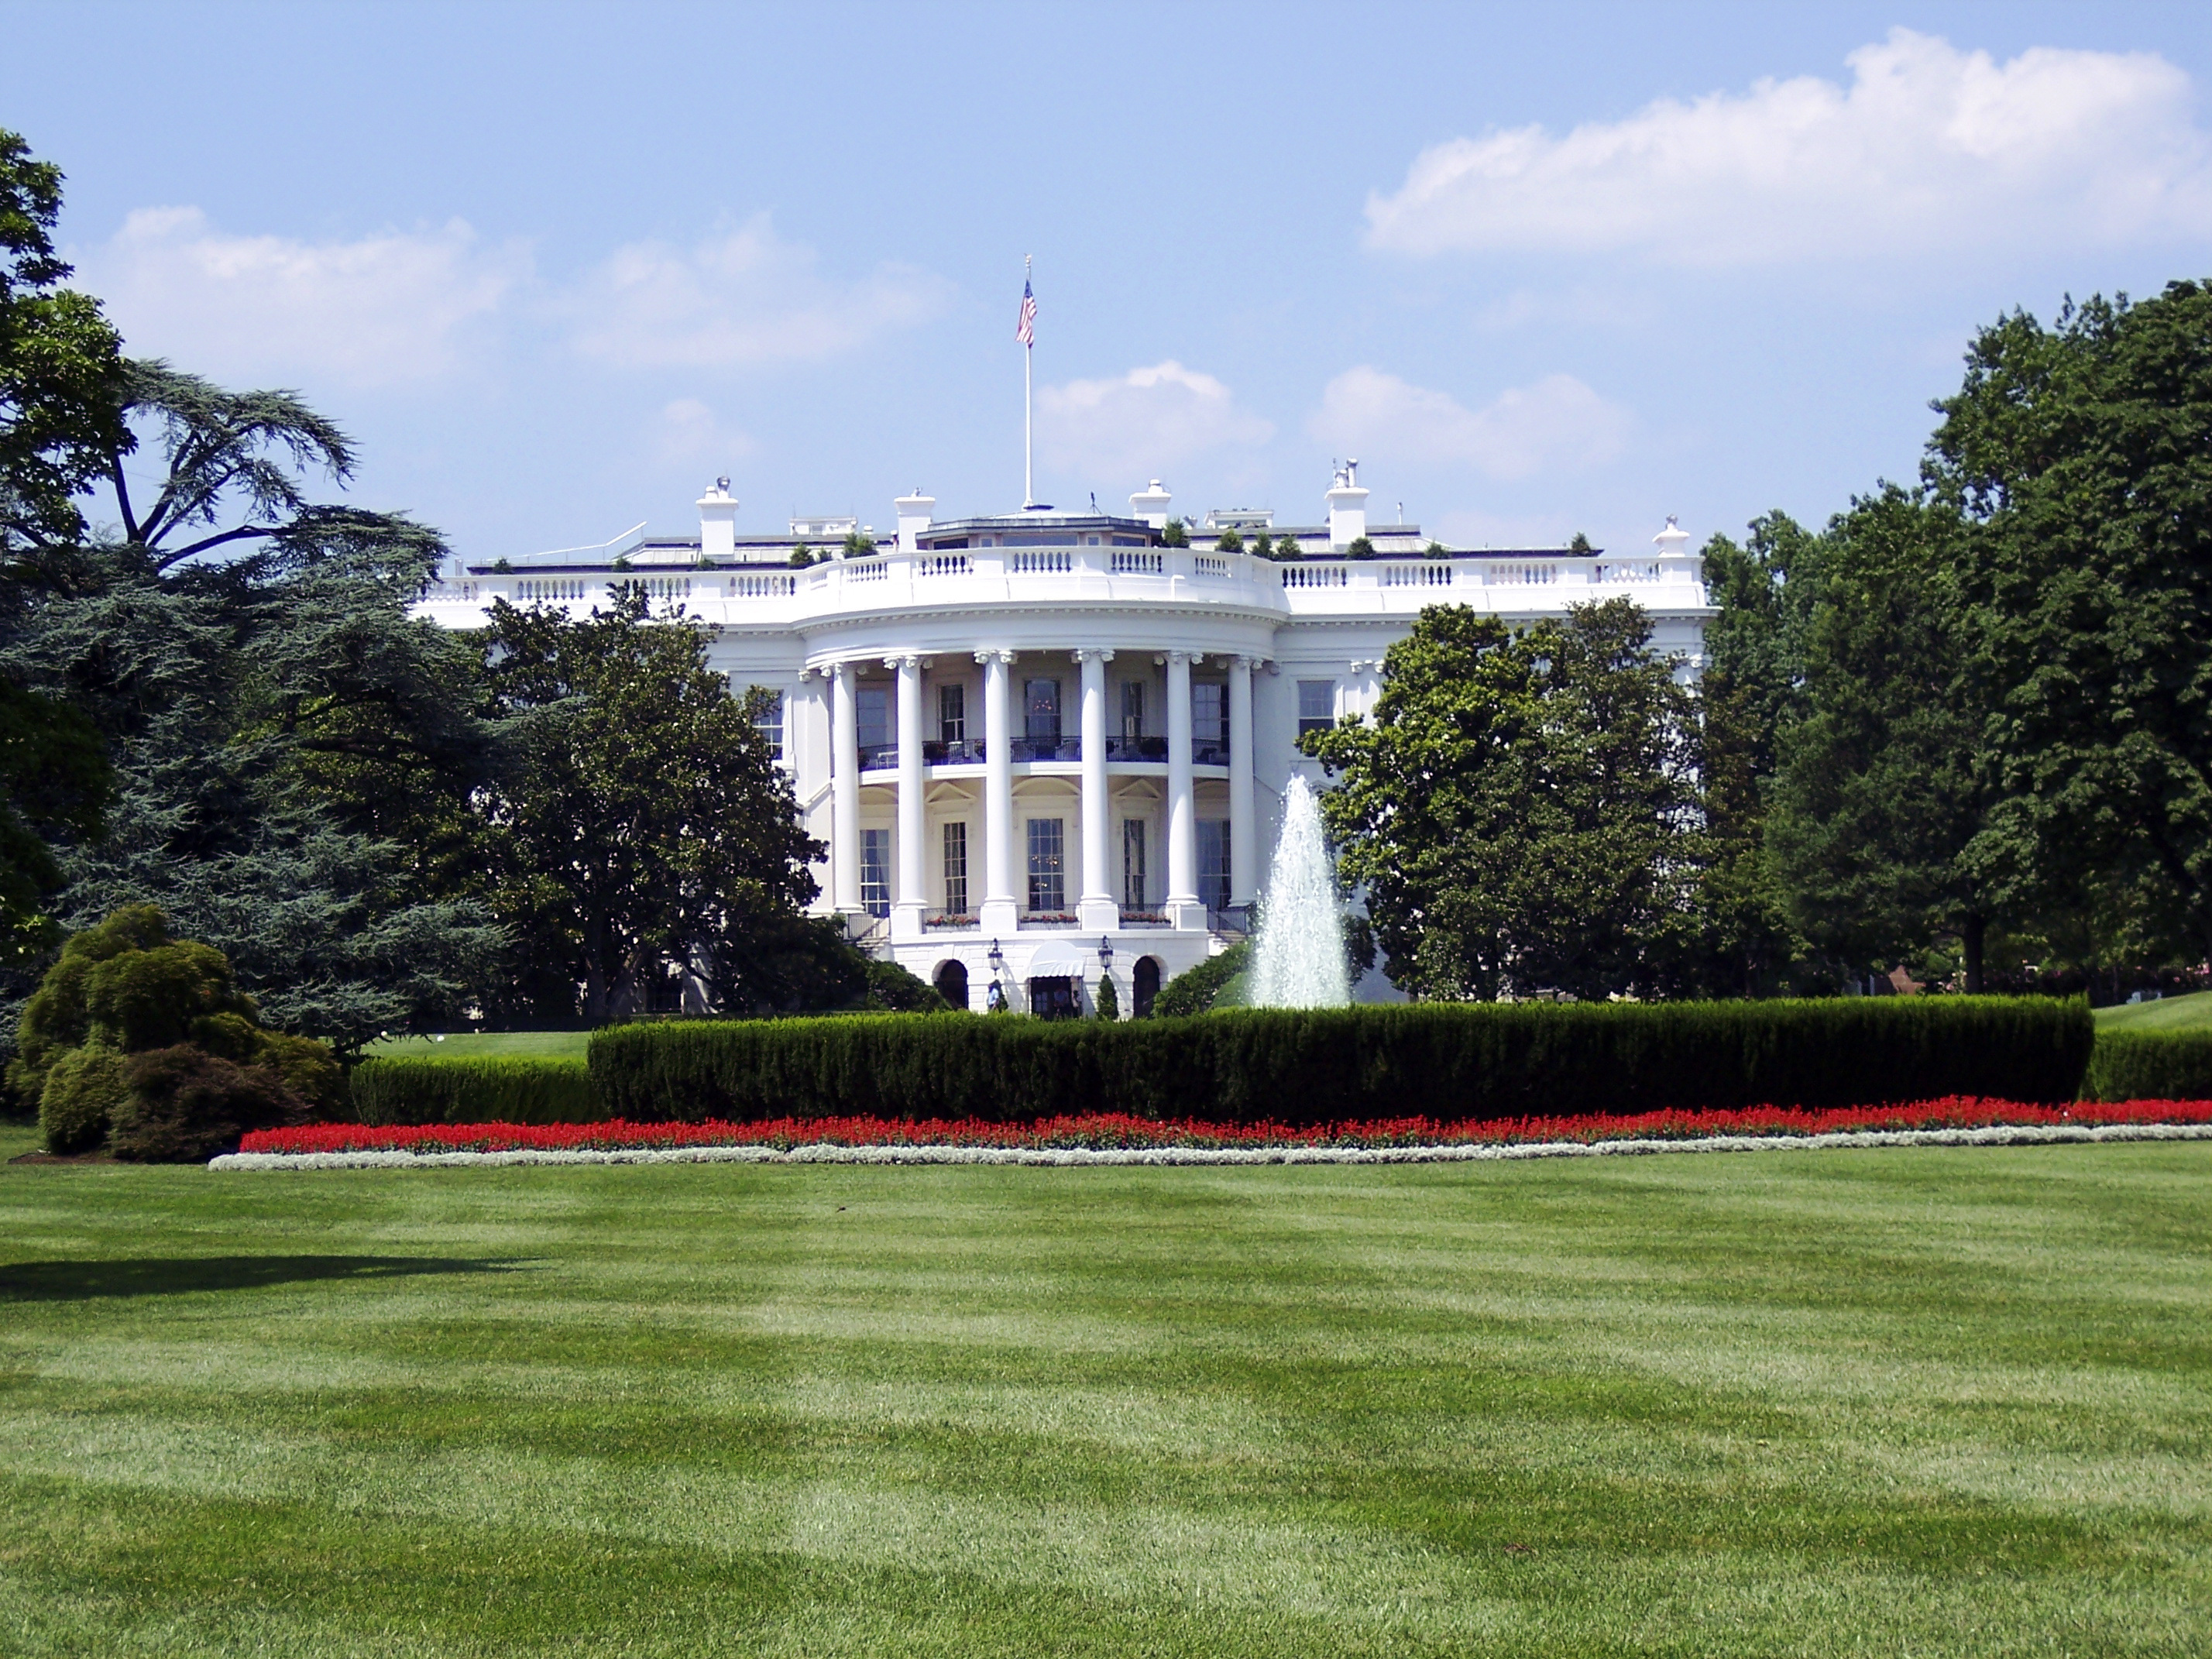 White House, Free stock photo, Government building, United States, 2860x2150 HD Desktop